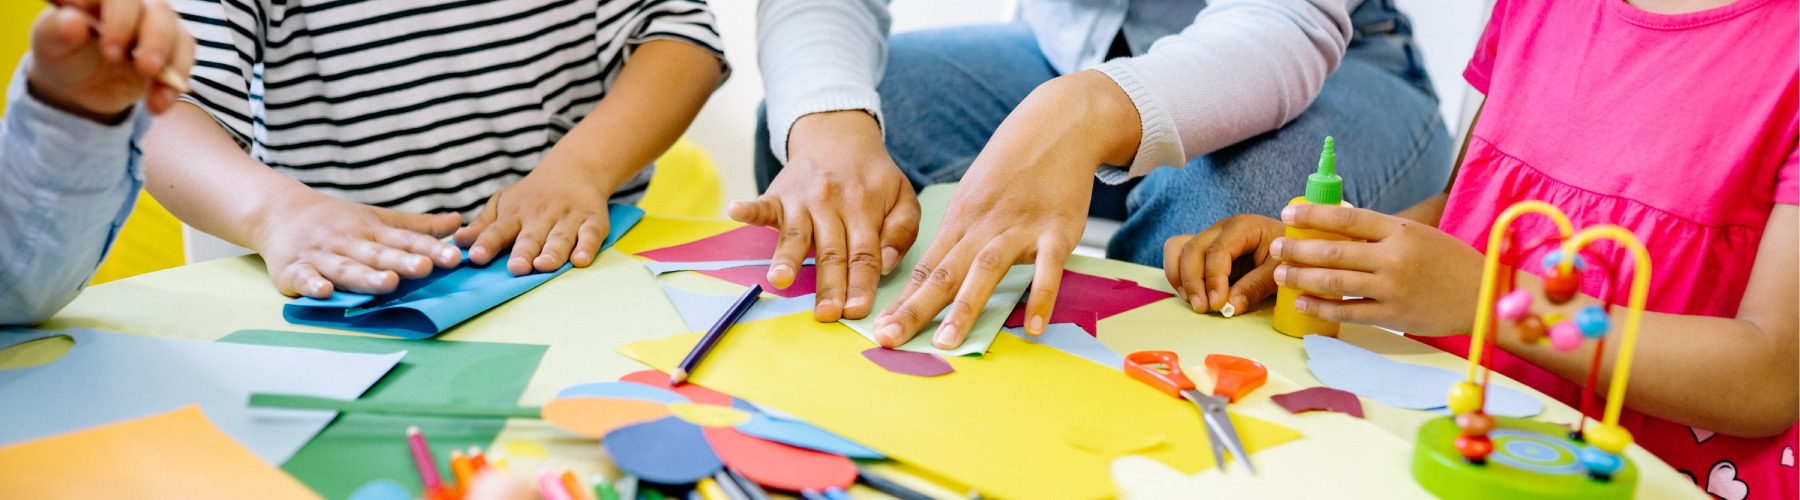 students hands cutting and folding construction paper on arts and crafts table